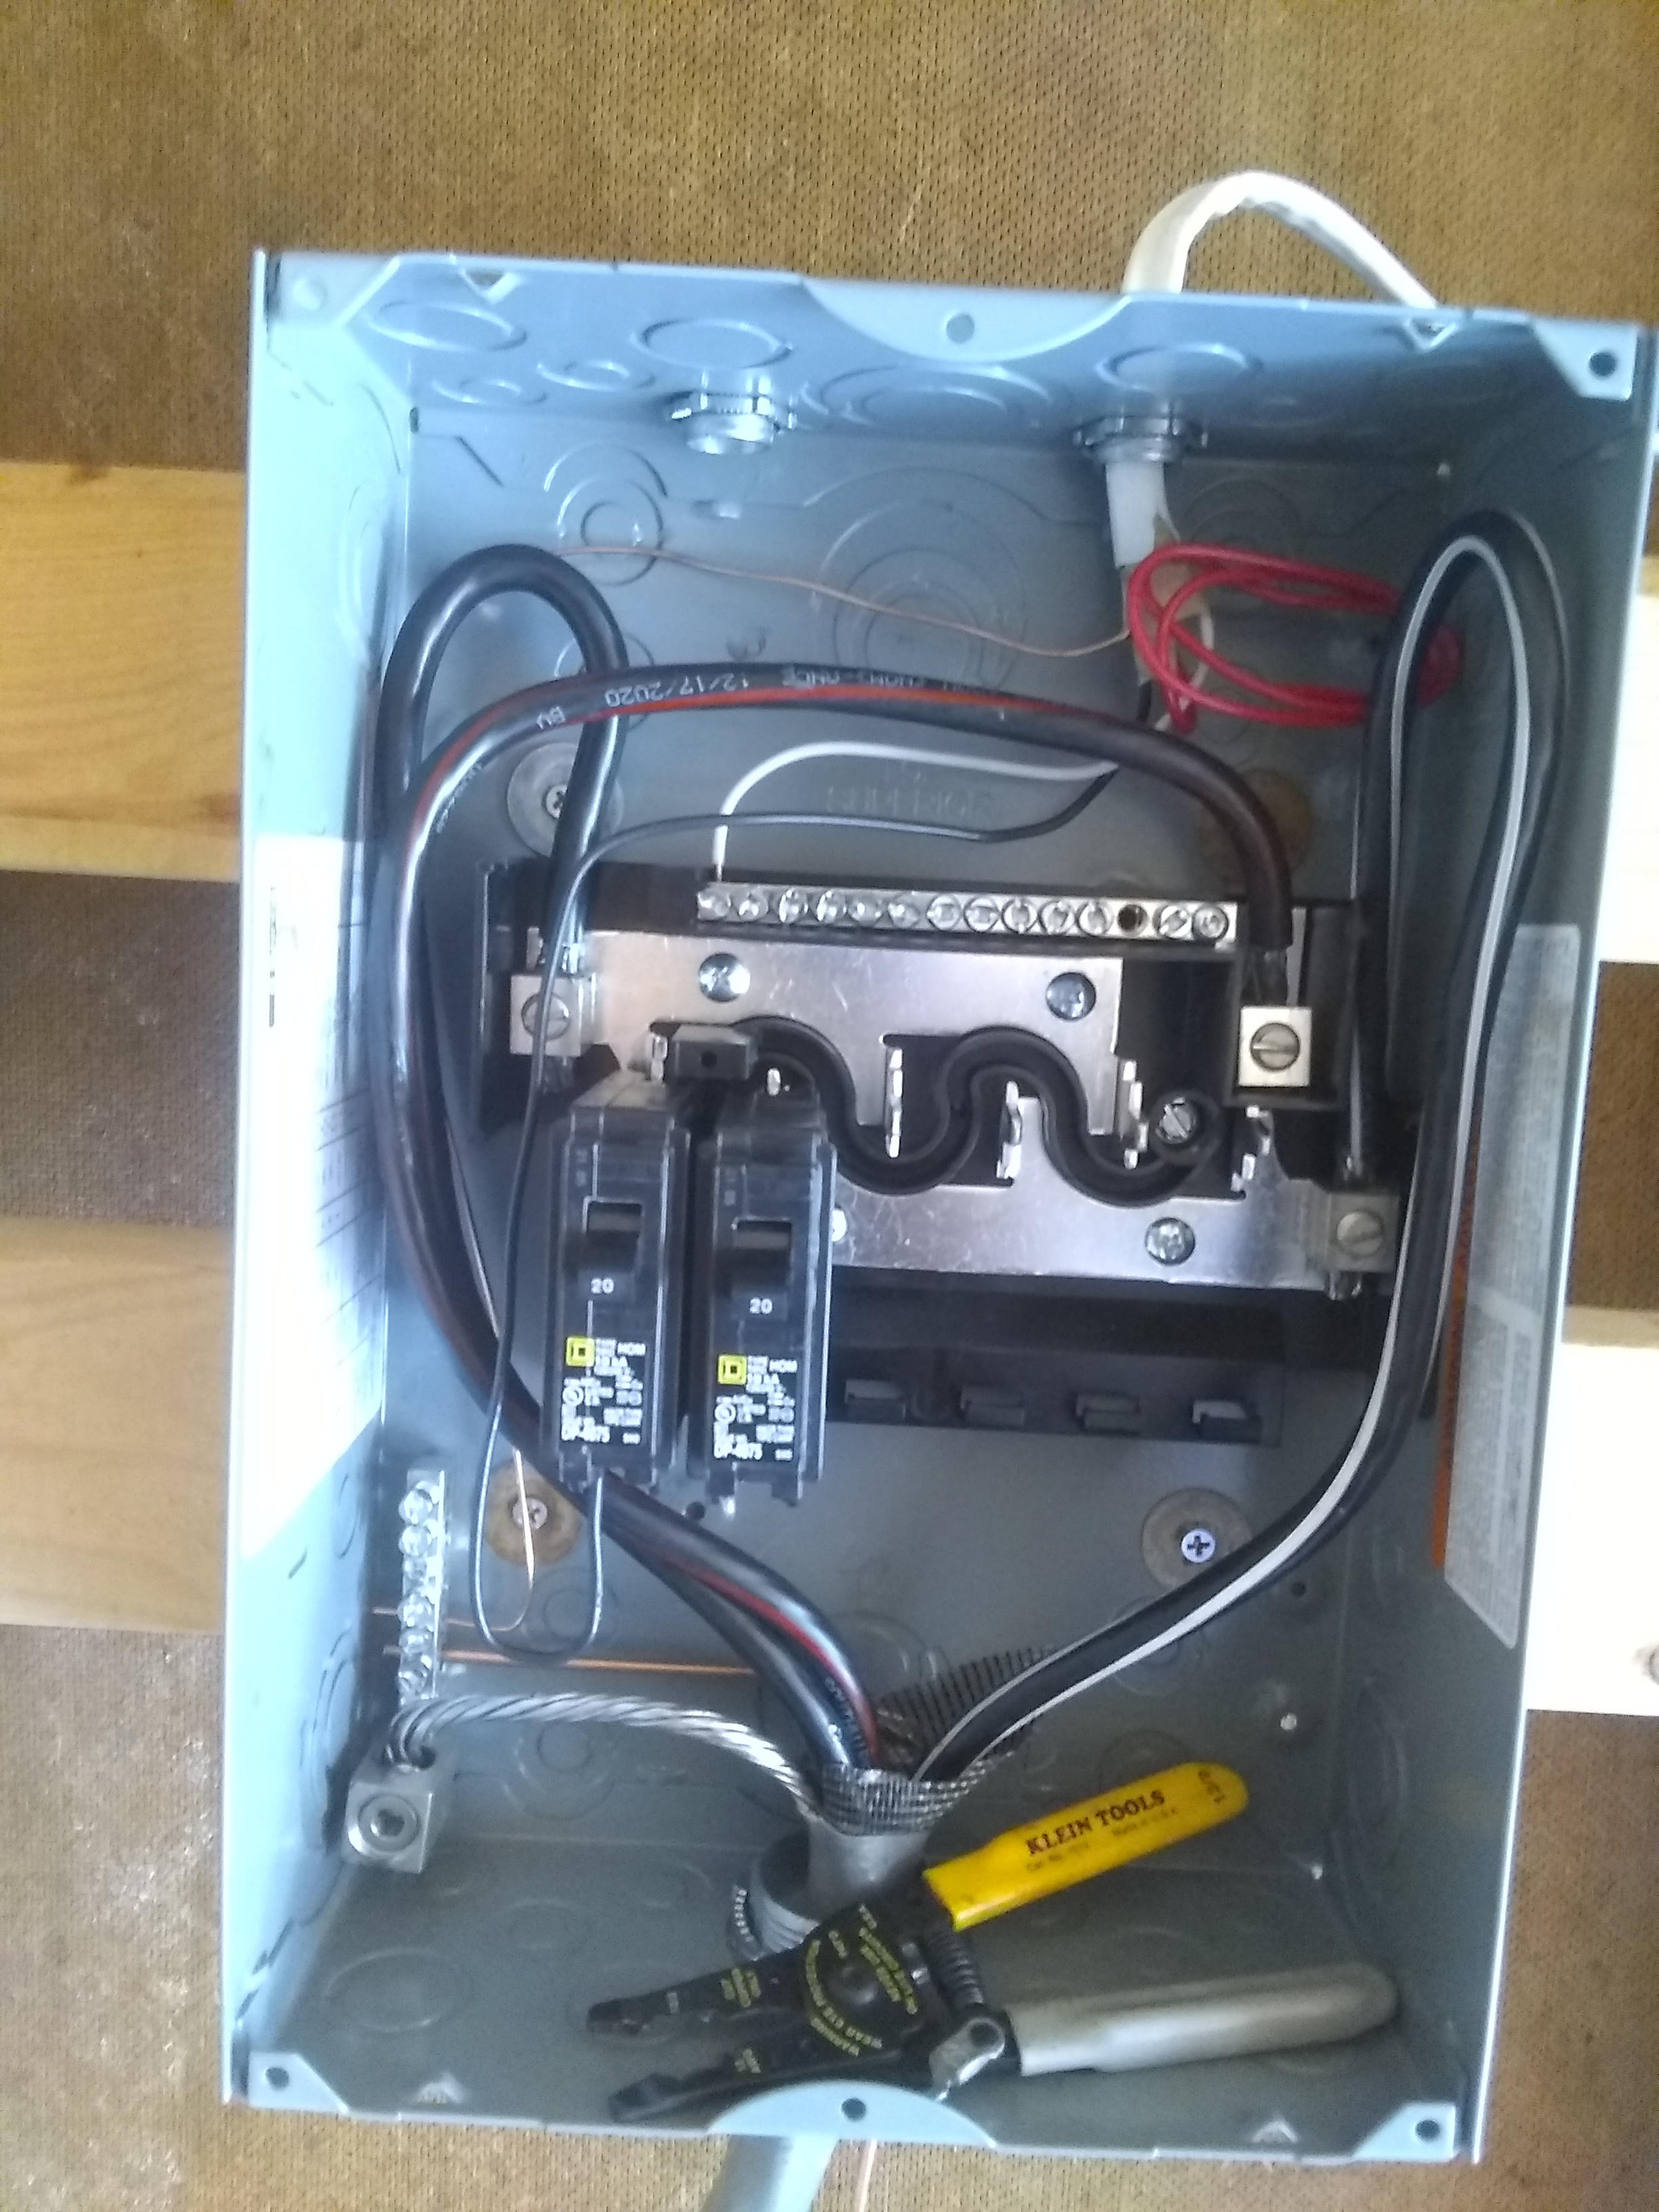 100 Amp Shed Breaker Box Lights wired.jpg